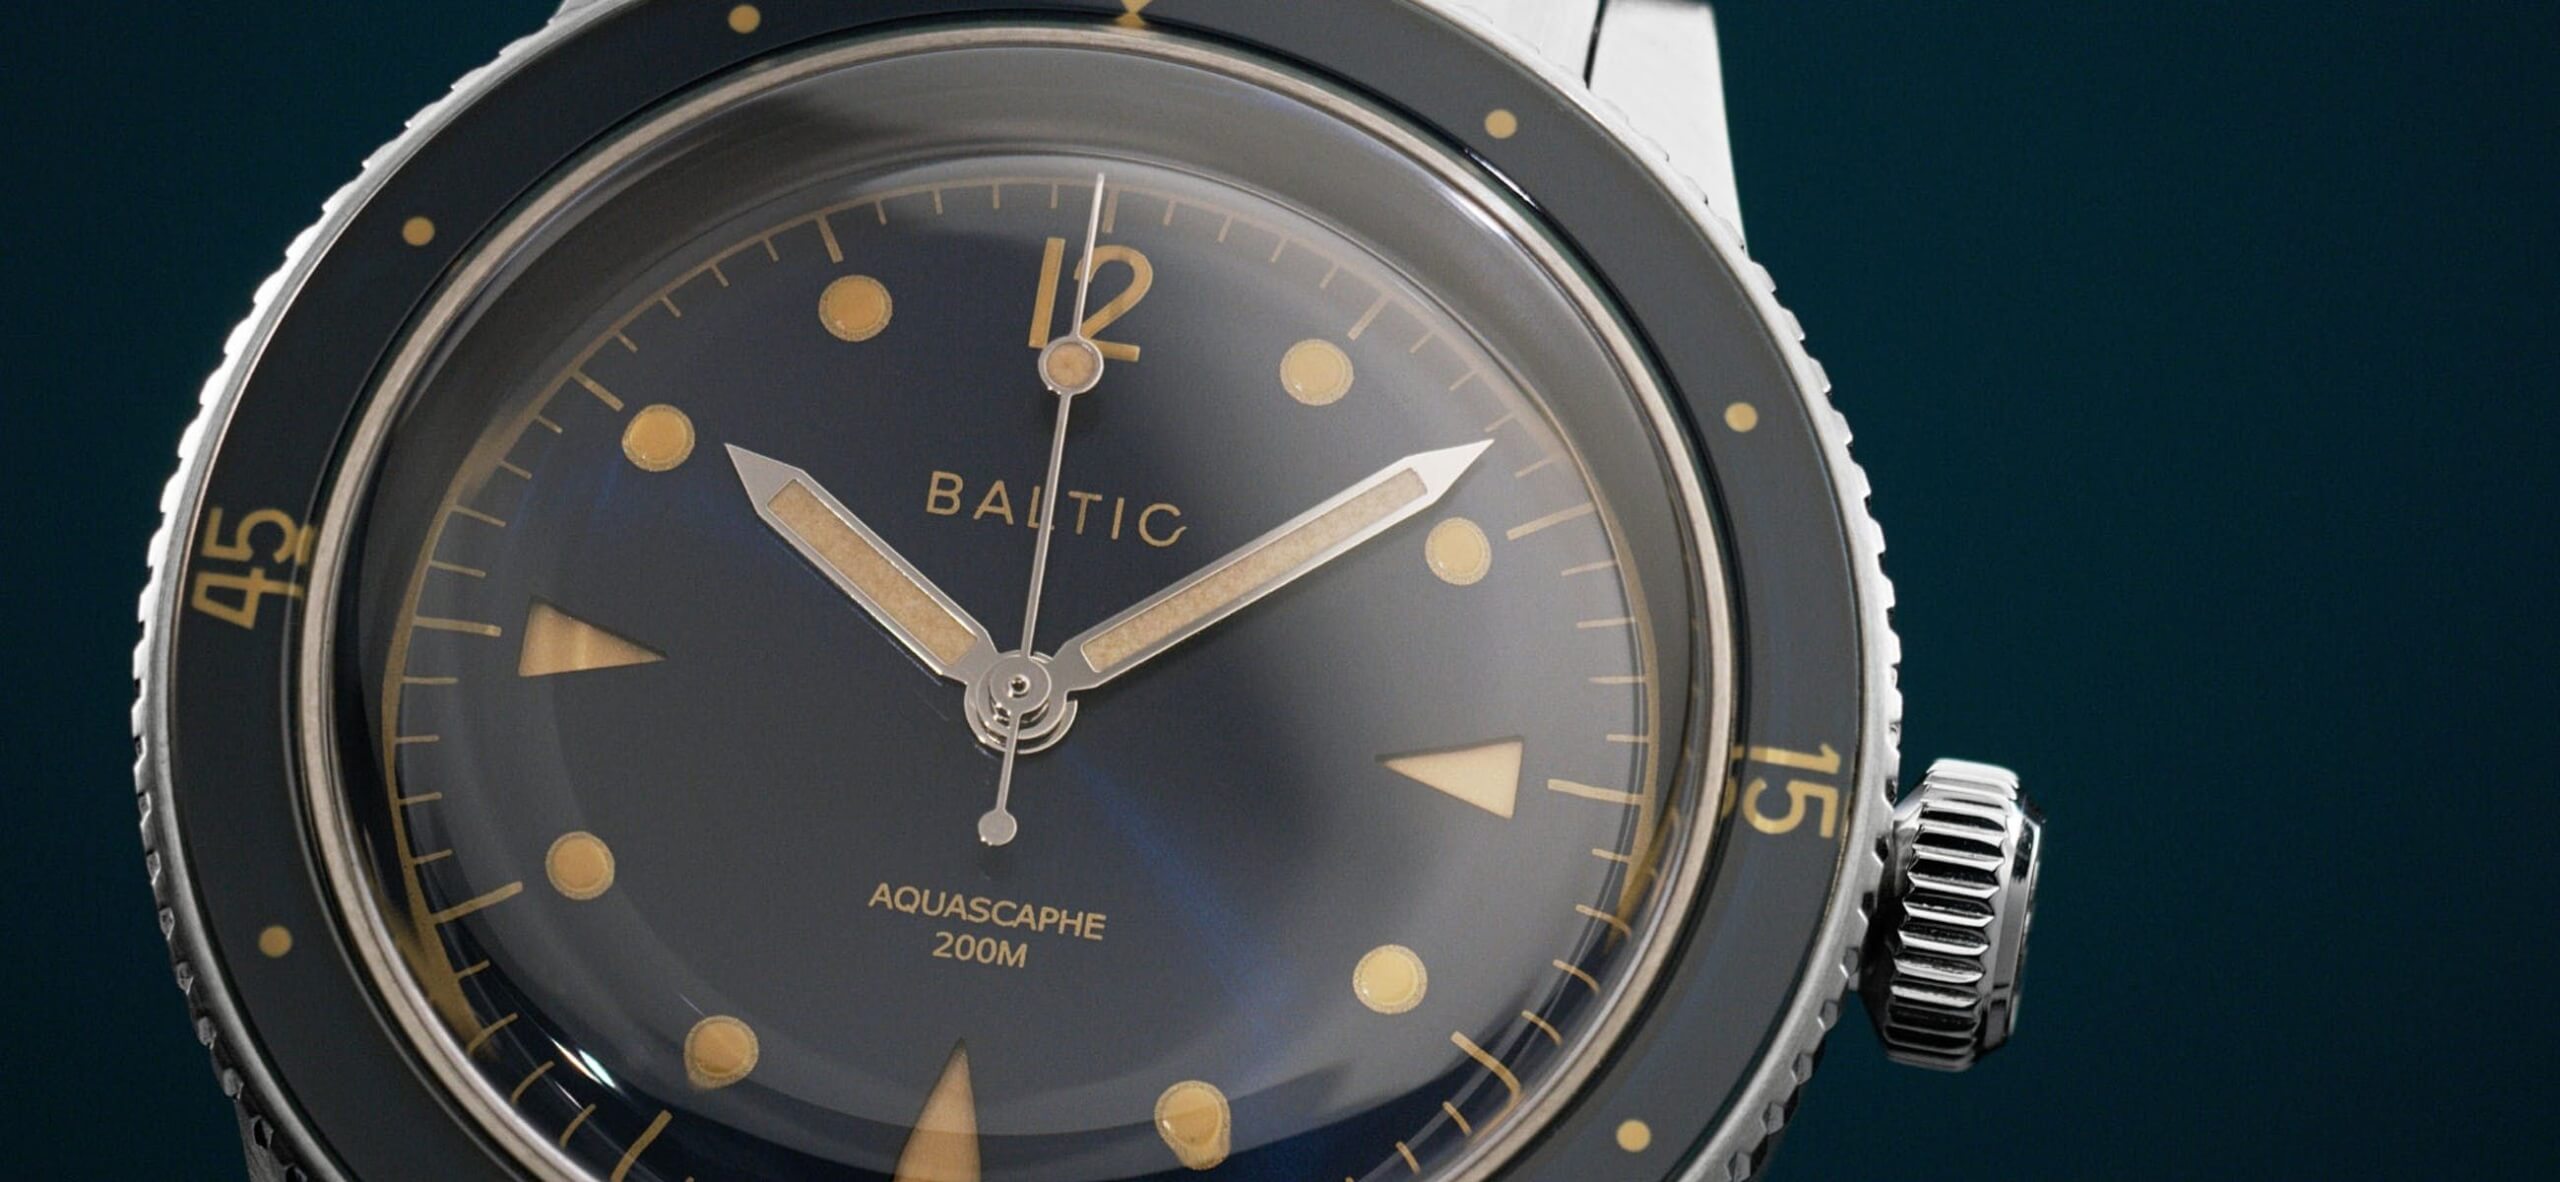 Baltic timepiece, with a dark blue dial.